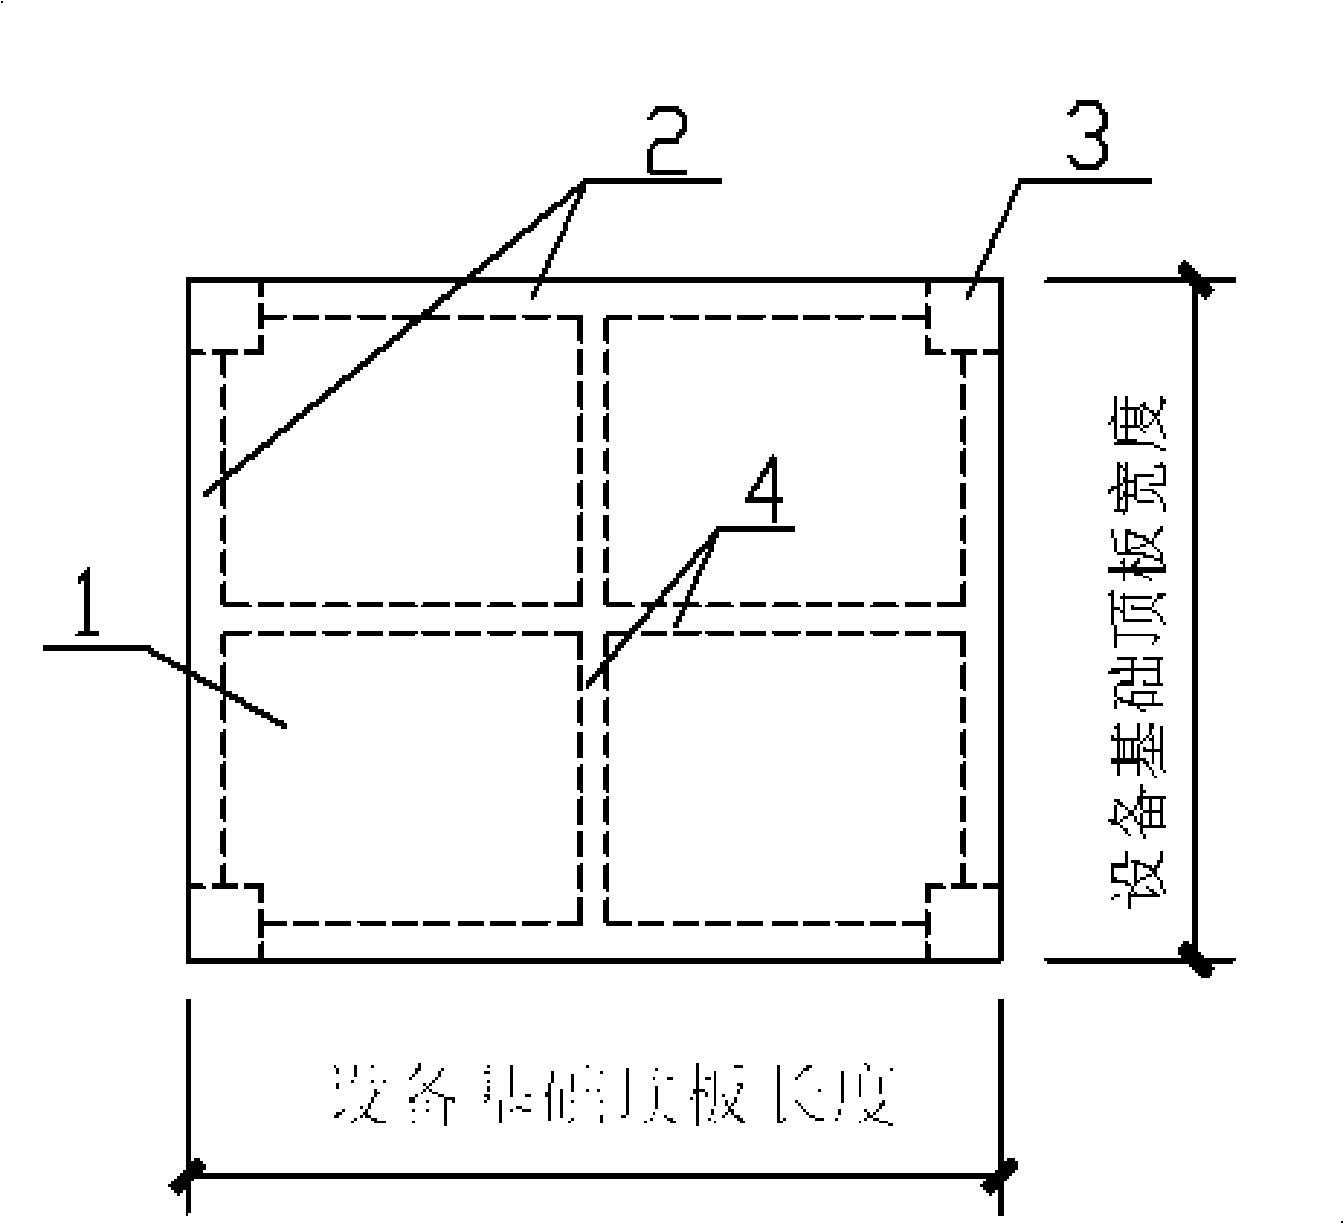 Elevated large-sized apparatus foundation structure